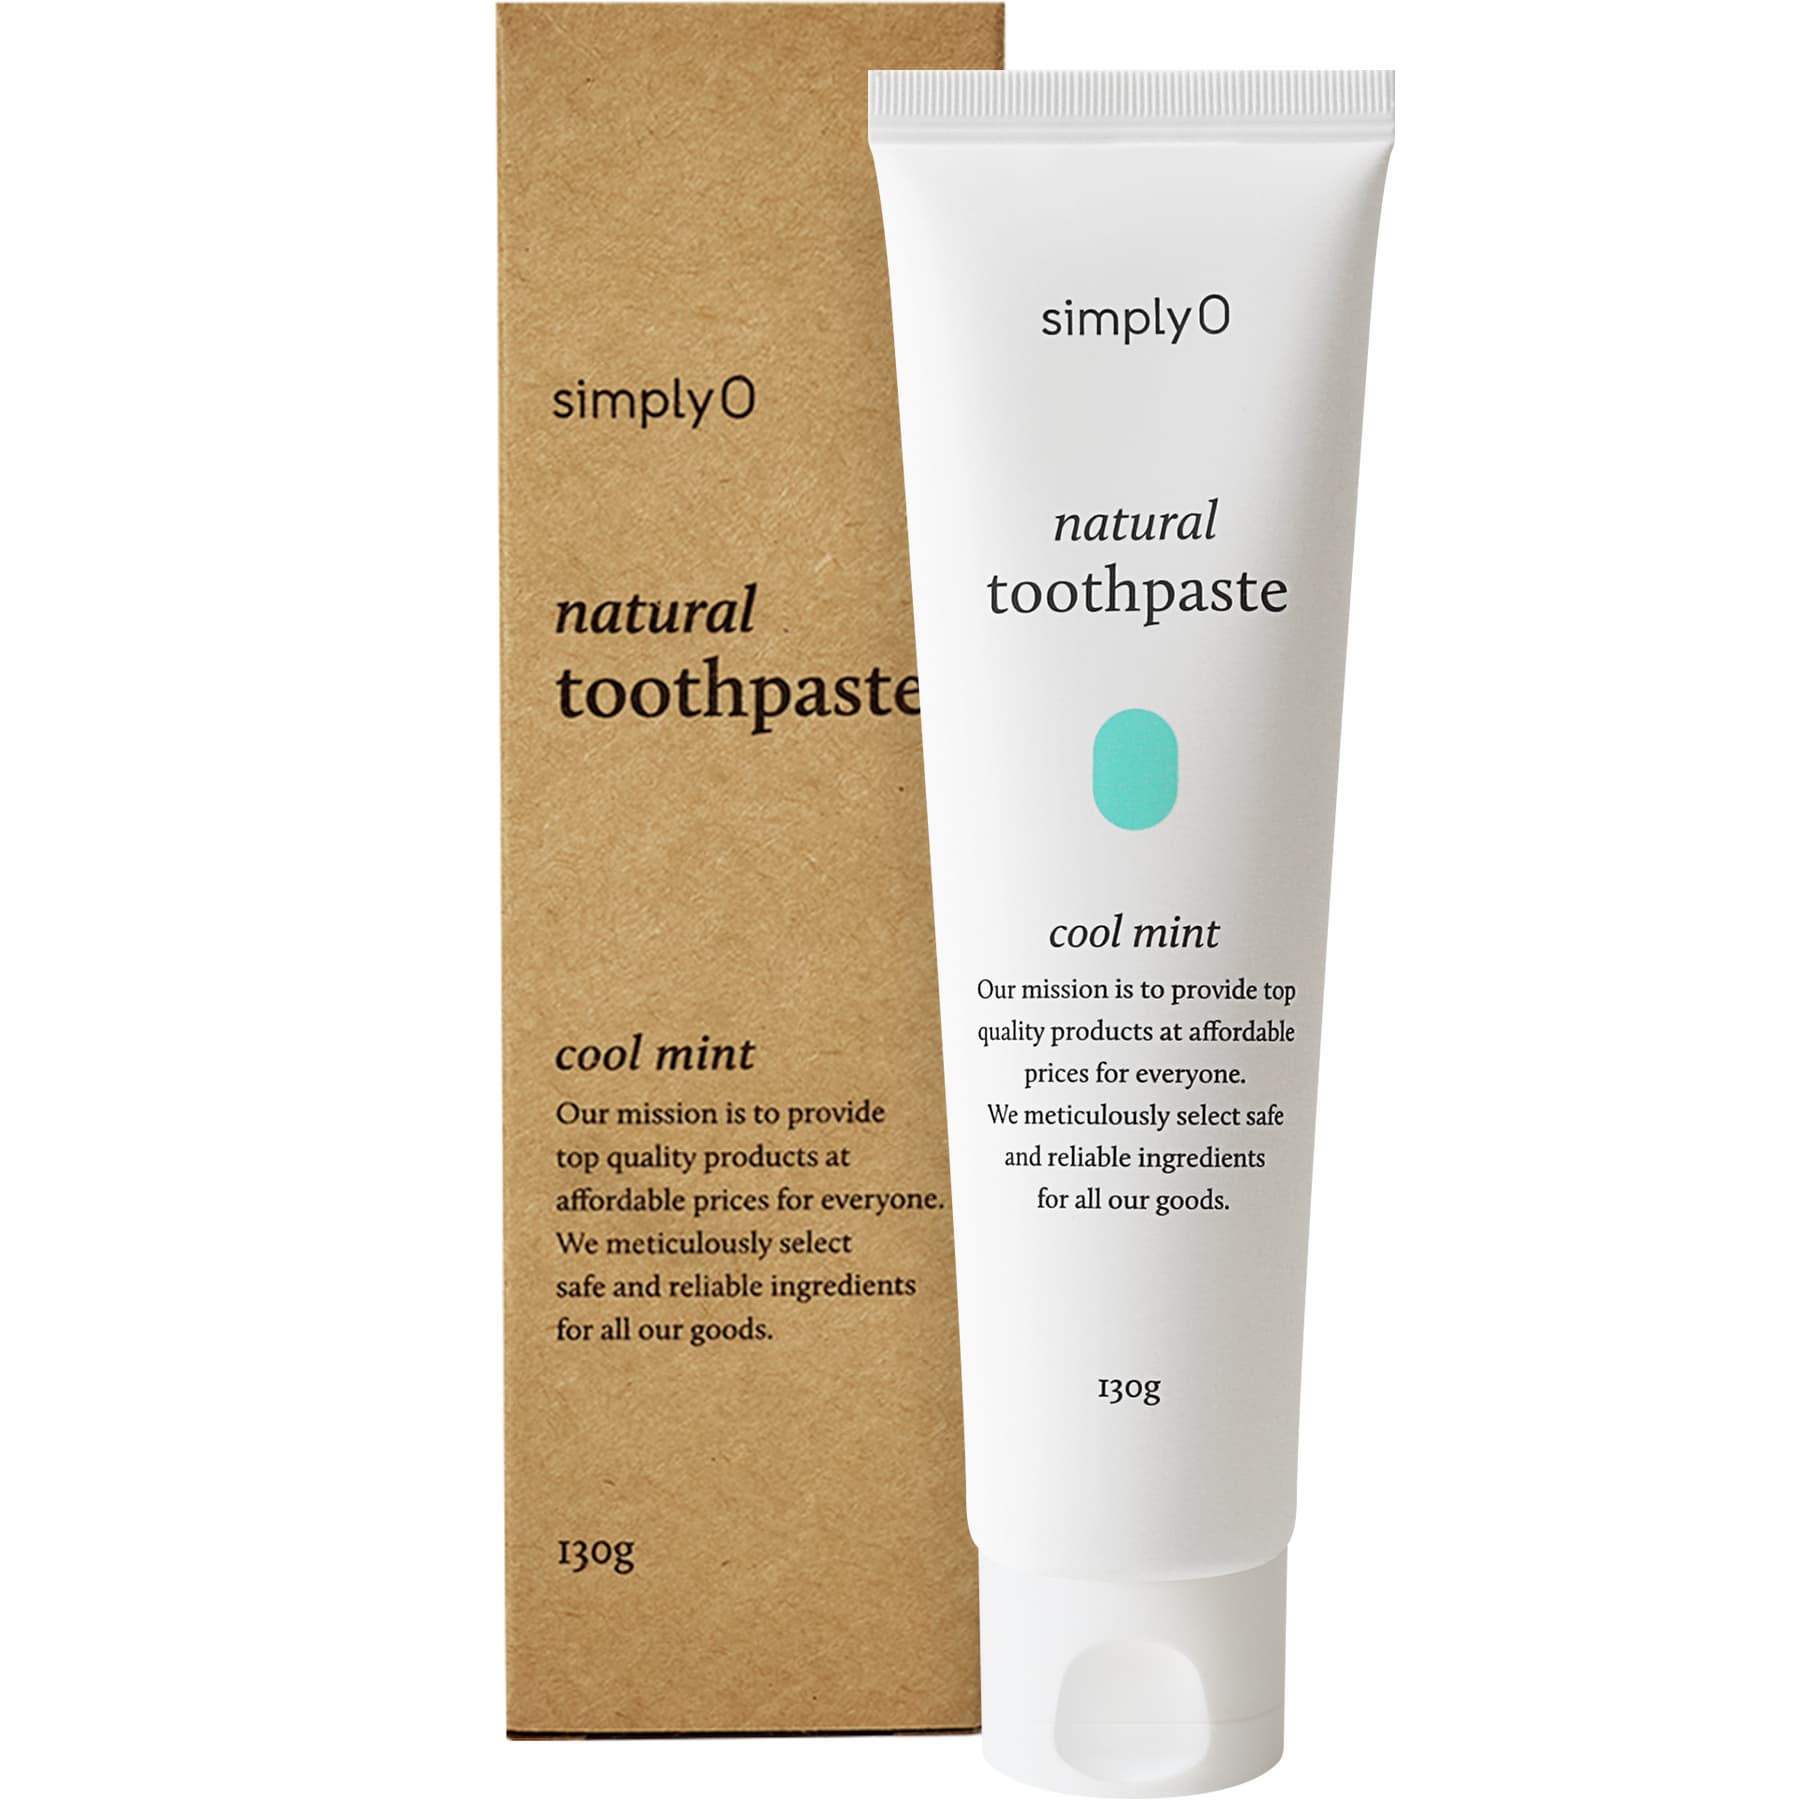 _Toothpaste_Natural toothpaste _ Cool mint